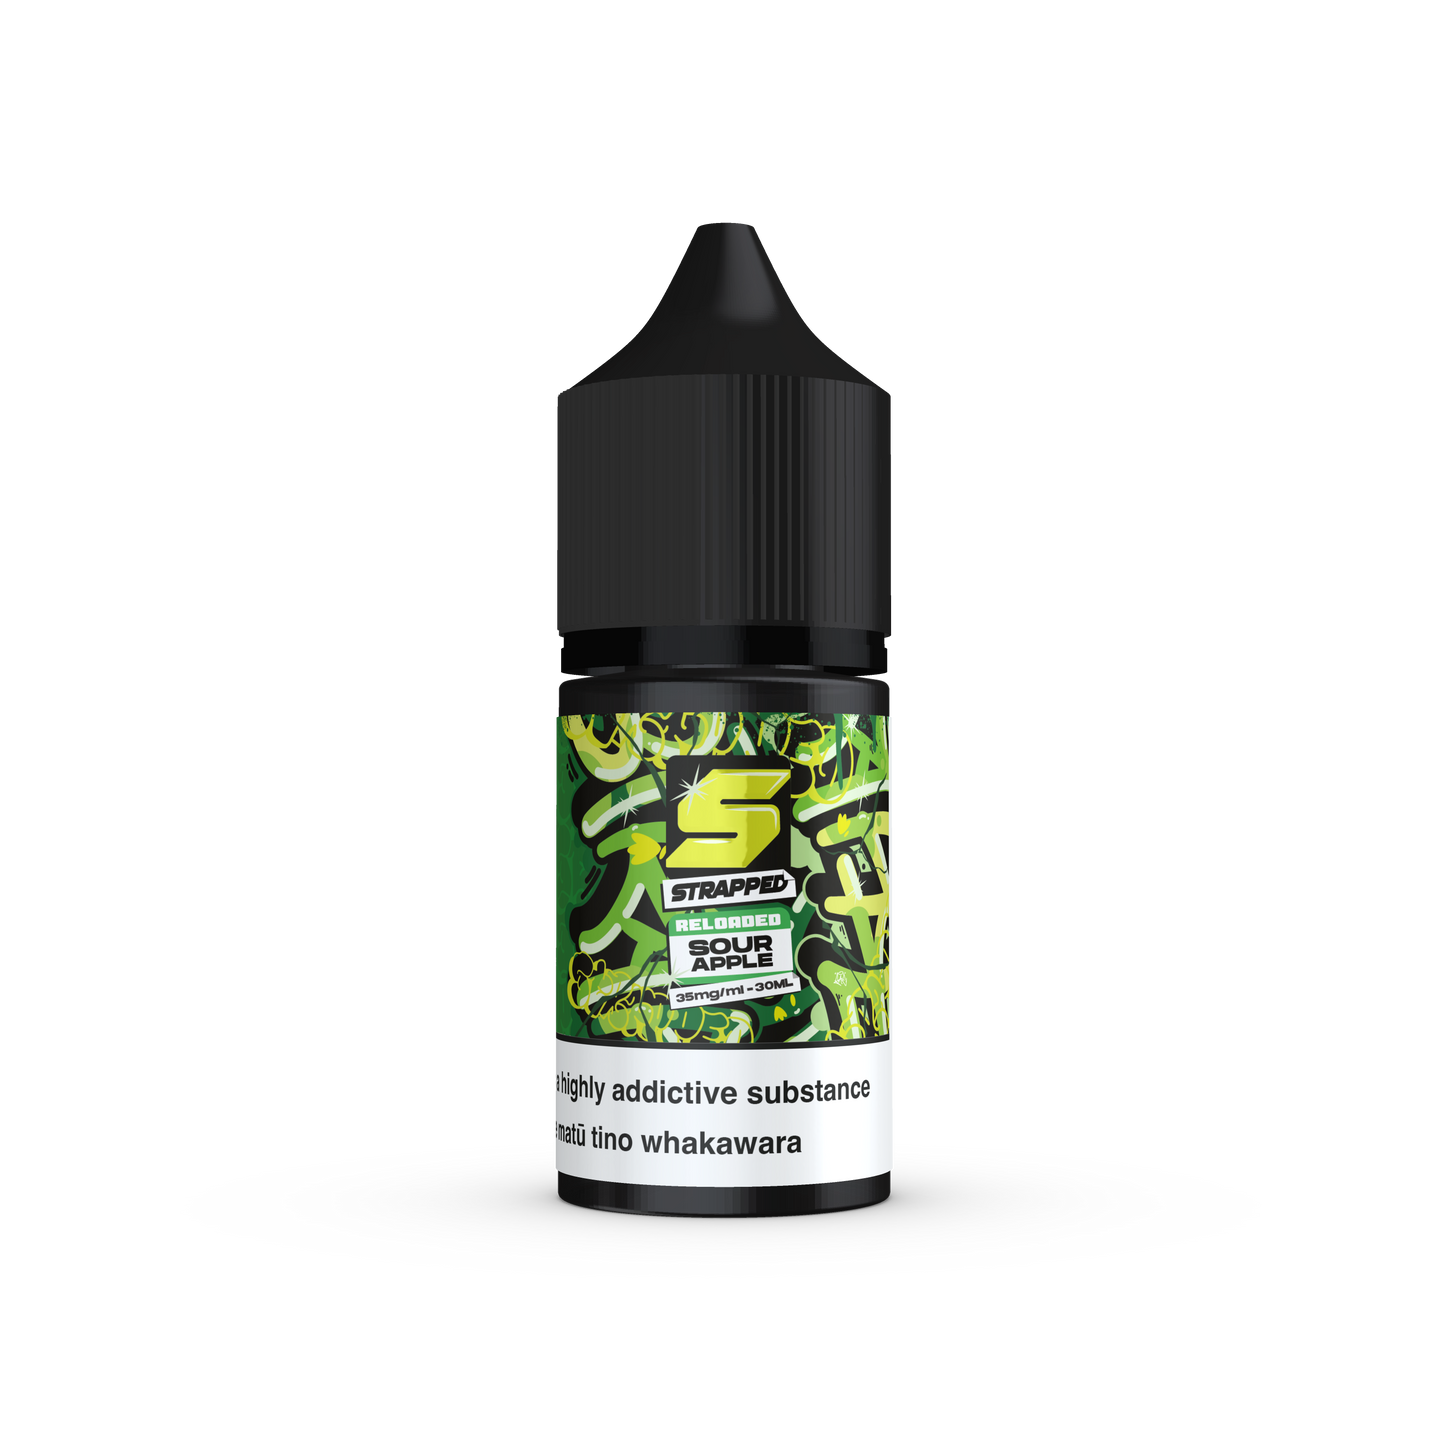 Strapped Reloaded Salts 30ml 35mg - Sour Apple